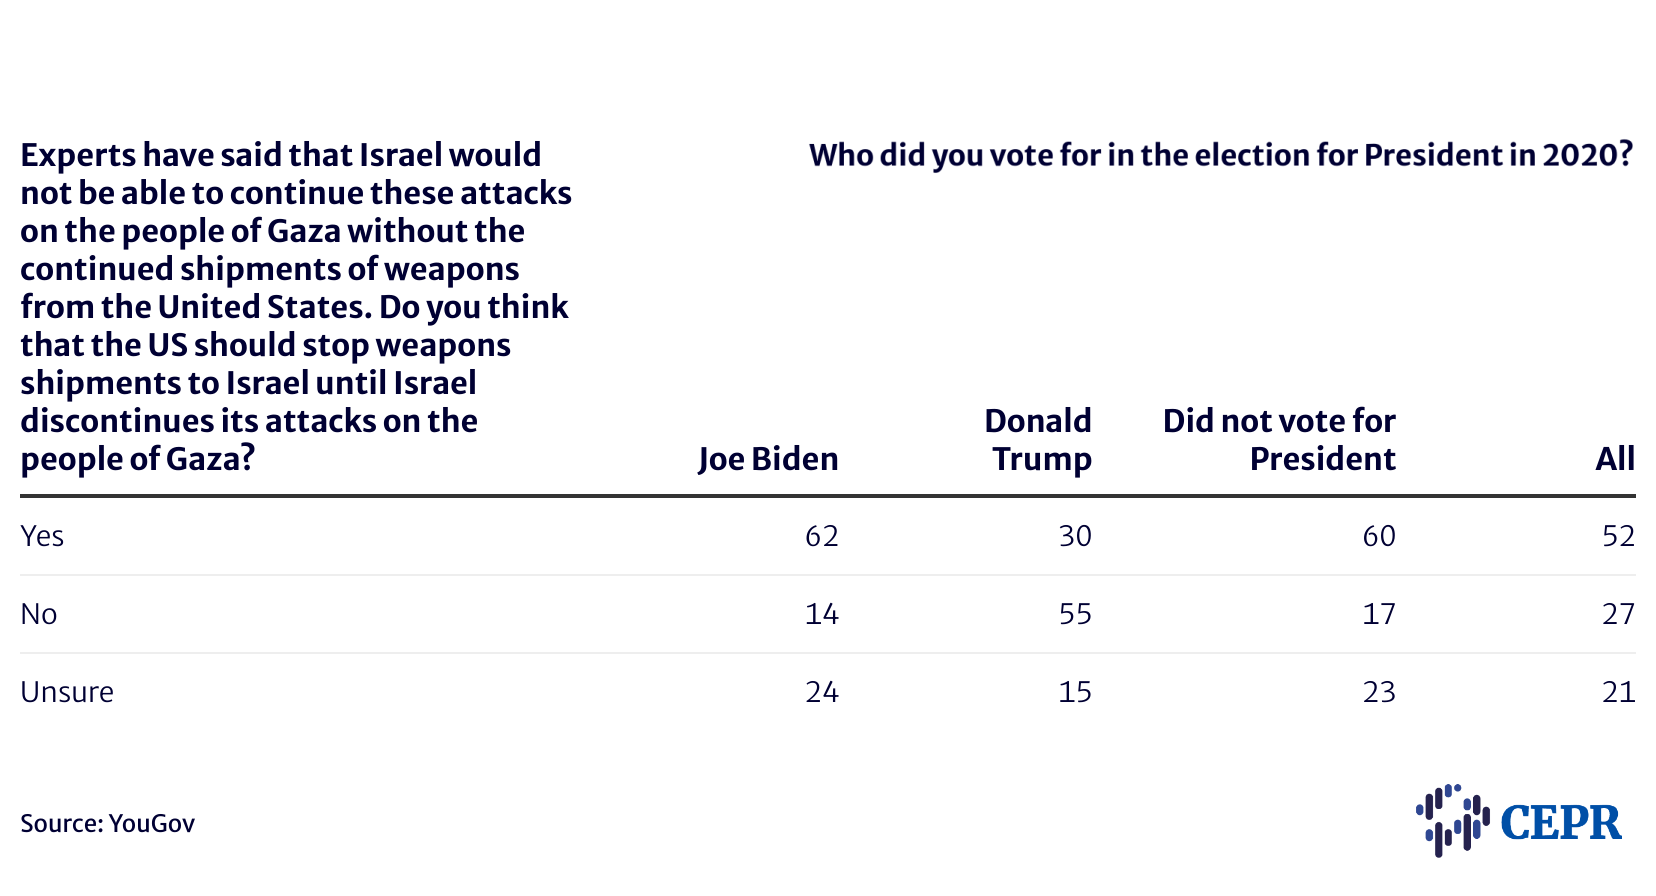 The poll shows a major partisan split as 62% of respondents who voted for President Biden in 2020 agree with the statement, “the U.S. should stop weapons shipments to Israel until Israel discontinues its attacks on the people of Gaza,” while just 14% disagree. Twenty-four percent of self-identified Biden voters remain unsure.

By contrast, only 30% of Trump voters support halting U.S. weapons shipments, while a majority (55%) oppose, and another 15% say they are unsure. Among those who did not vote in the 2020 presidential elections– a key group containing voters that both Democrats and Republicans would like to turn out this year–fully 60% agreed that the U.S. should block weapons shipments, while just 17% disagreed and 23% remained unsure.